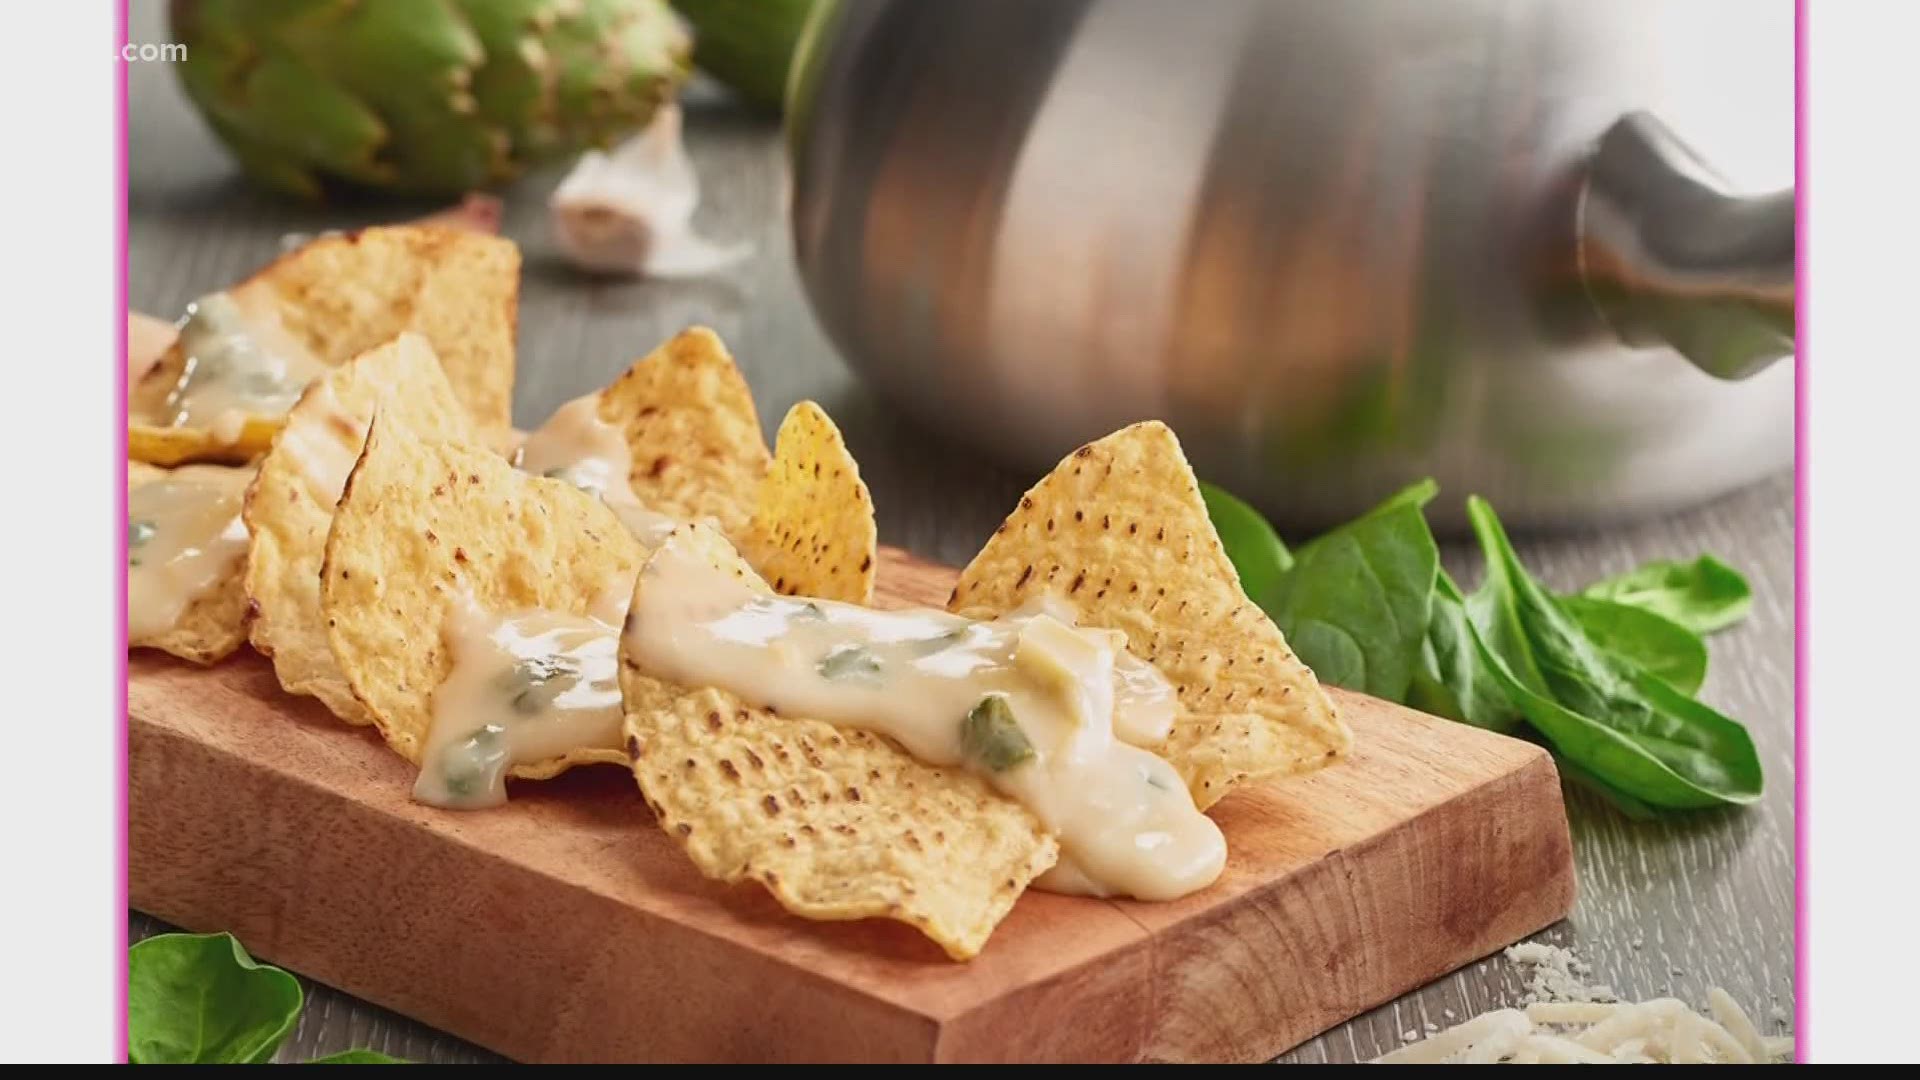 Karen Barnett from The Melting Pot Town & Country shares a recipe for Spinach Artichoke Cheese Fondue.